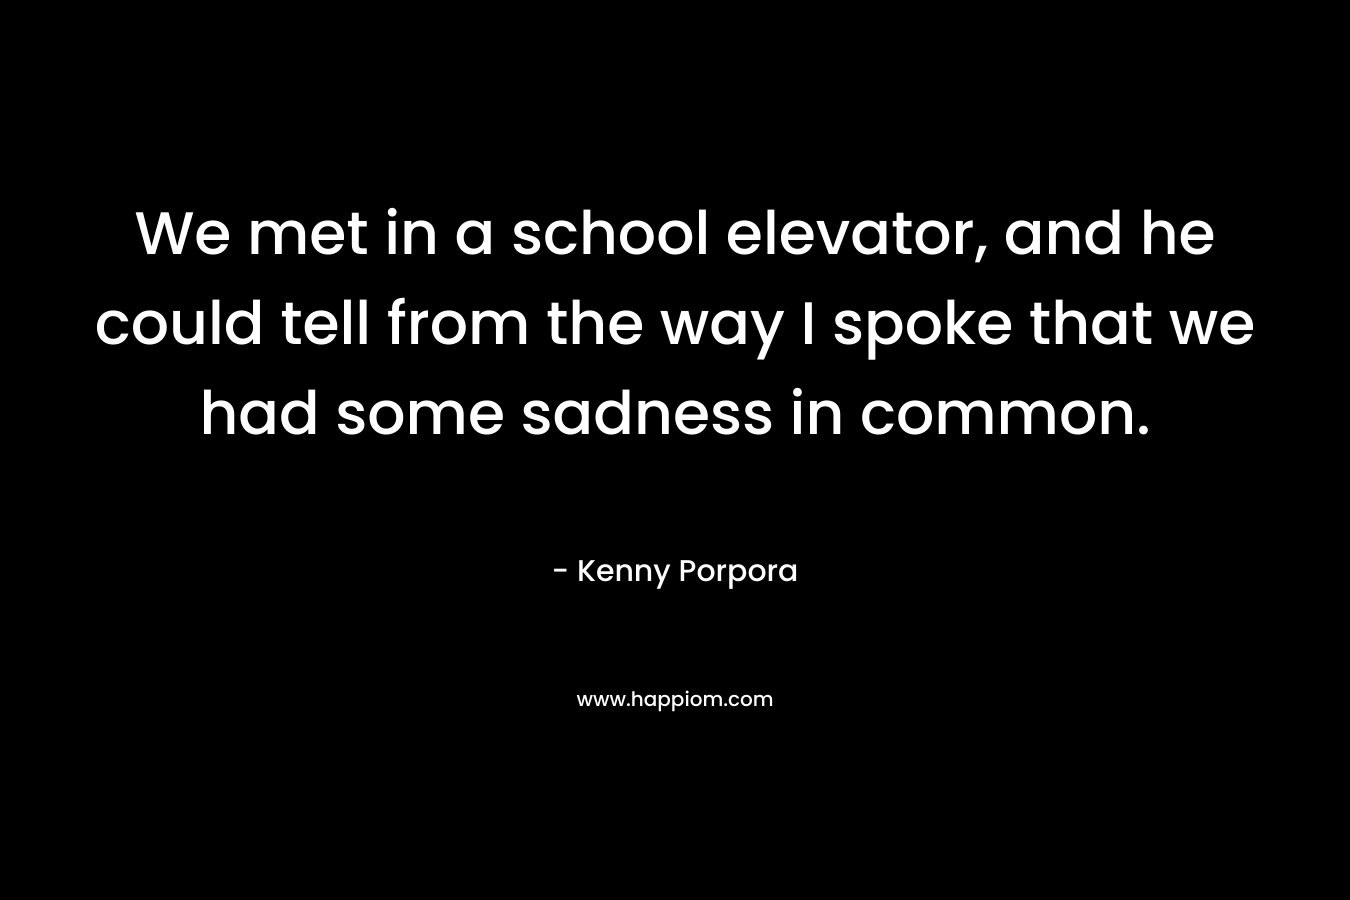 We met in a school elevator, and he could tell from the way I spoke that we had some sadness in common. – Kenny Porpora